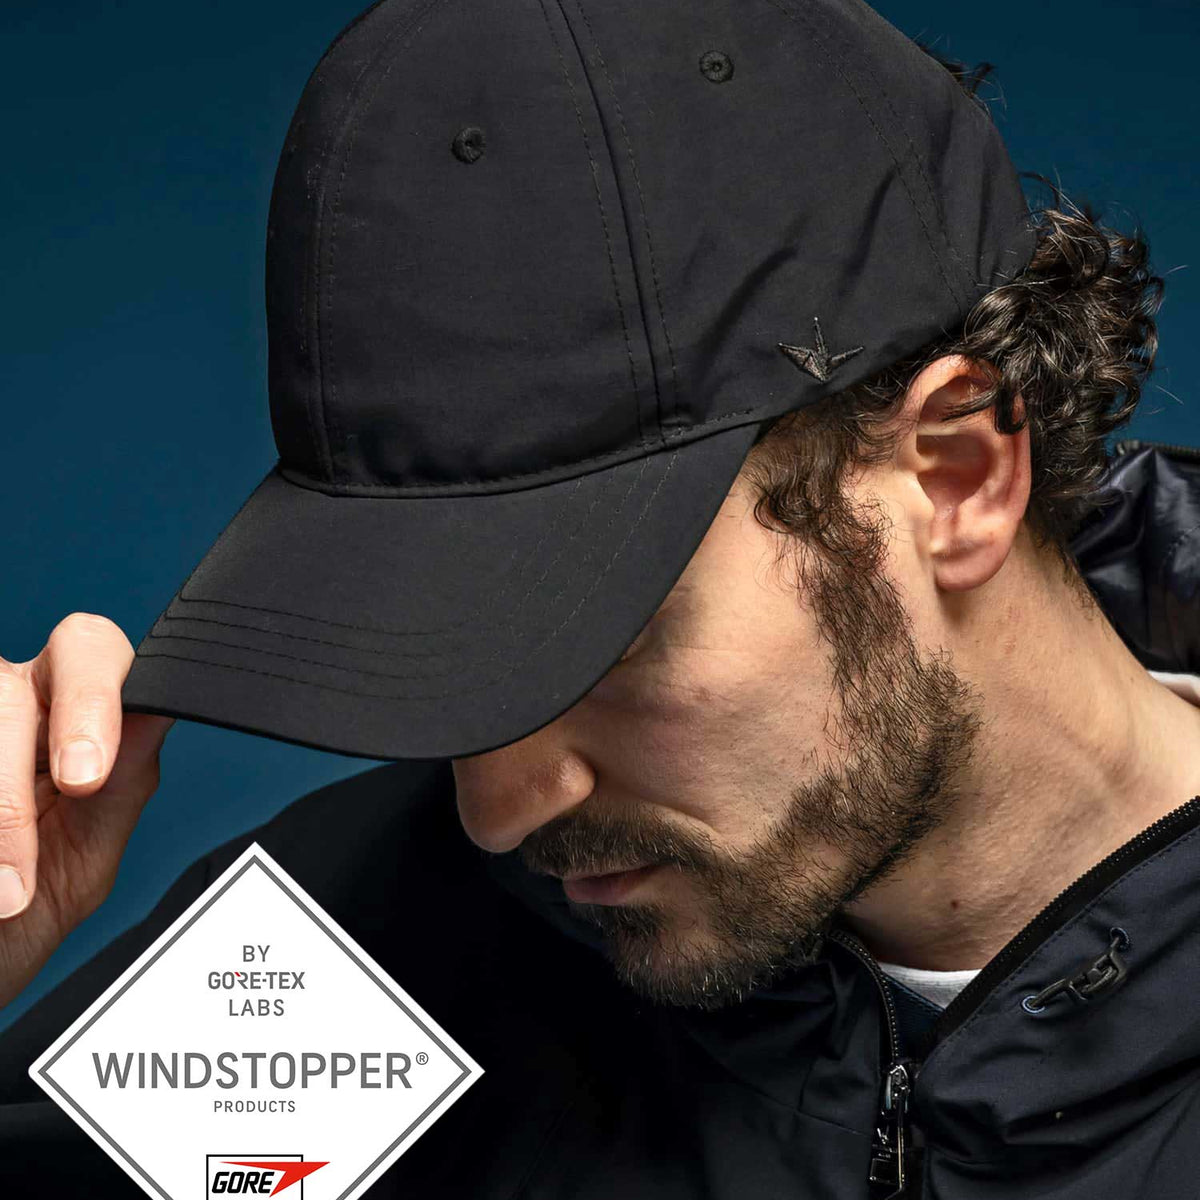 【MENS】ベーシックキャップ WINDSTOPPER(R) プロダクト by 